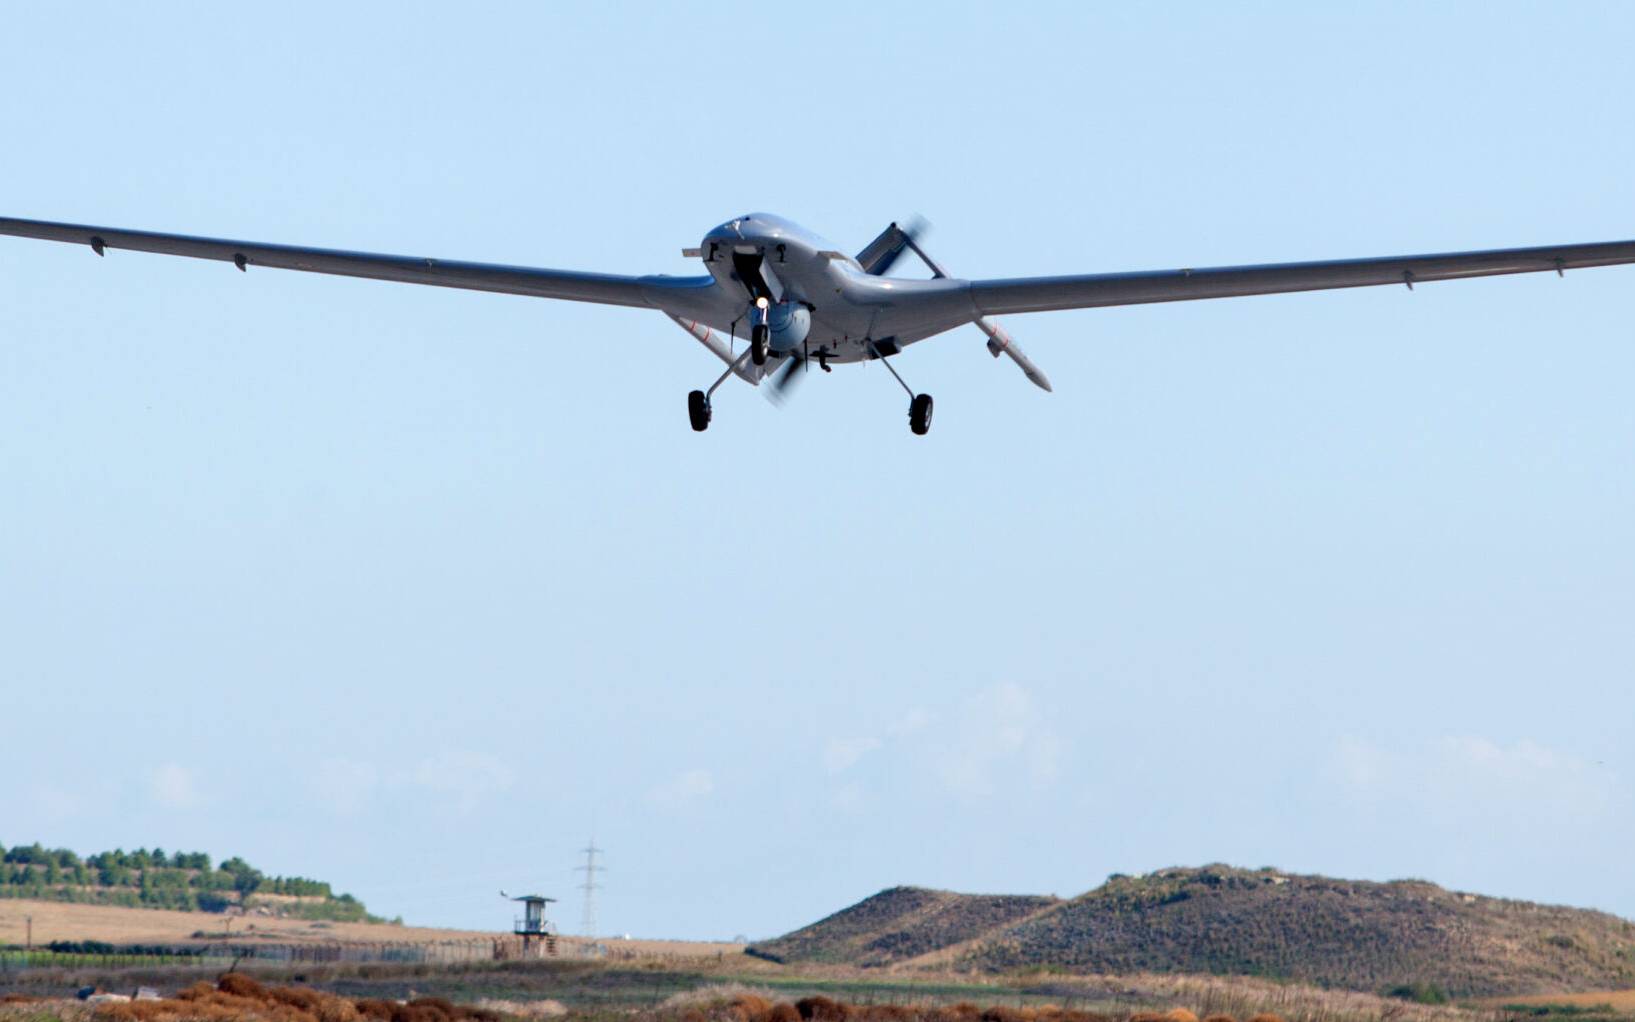 The Bayraktar TB2 drone is pictured flying on December 16, 2019 at Gecitkale military airbase near Famagusta in the self-proclaimed Turkish Republic of Northern Cyprus (TRNC). - The Turkish military drone was delivered to northern Cyprus amid growing tensions over Turkey's deal with Libya that extended its claims to the gas-rich eastern Mediterranean. The Bayraktar TB2 drone landed in Gecitkale Airport in Famagusta around 0700 GMT, an AFP correspondent said, after the breakaway northern Cyprus government approved the use of the airport for unmanned aerial vehicles. It followed a deal signed last month between Libya and Turkey that could prove crucial in the scramble for recently discovered gas reserves in the eastern Mediterranean. (Photo by Birol BEBEK / AFP)